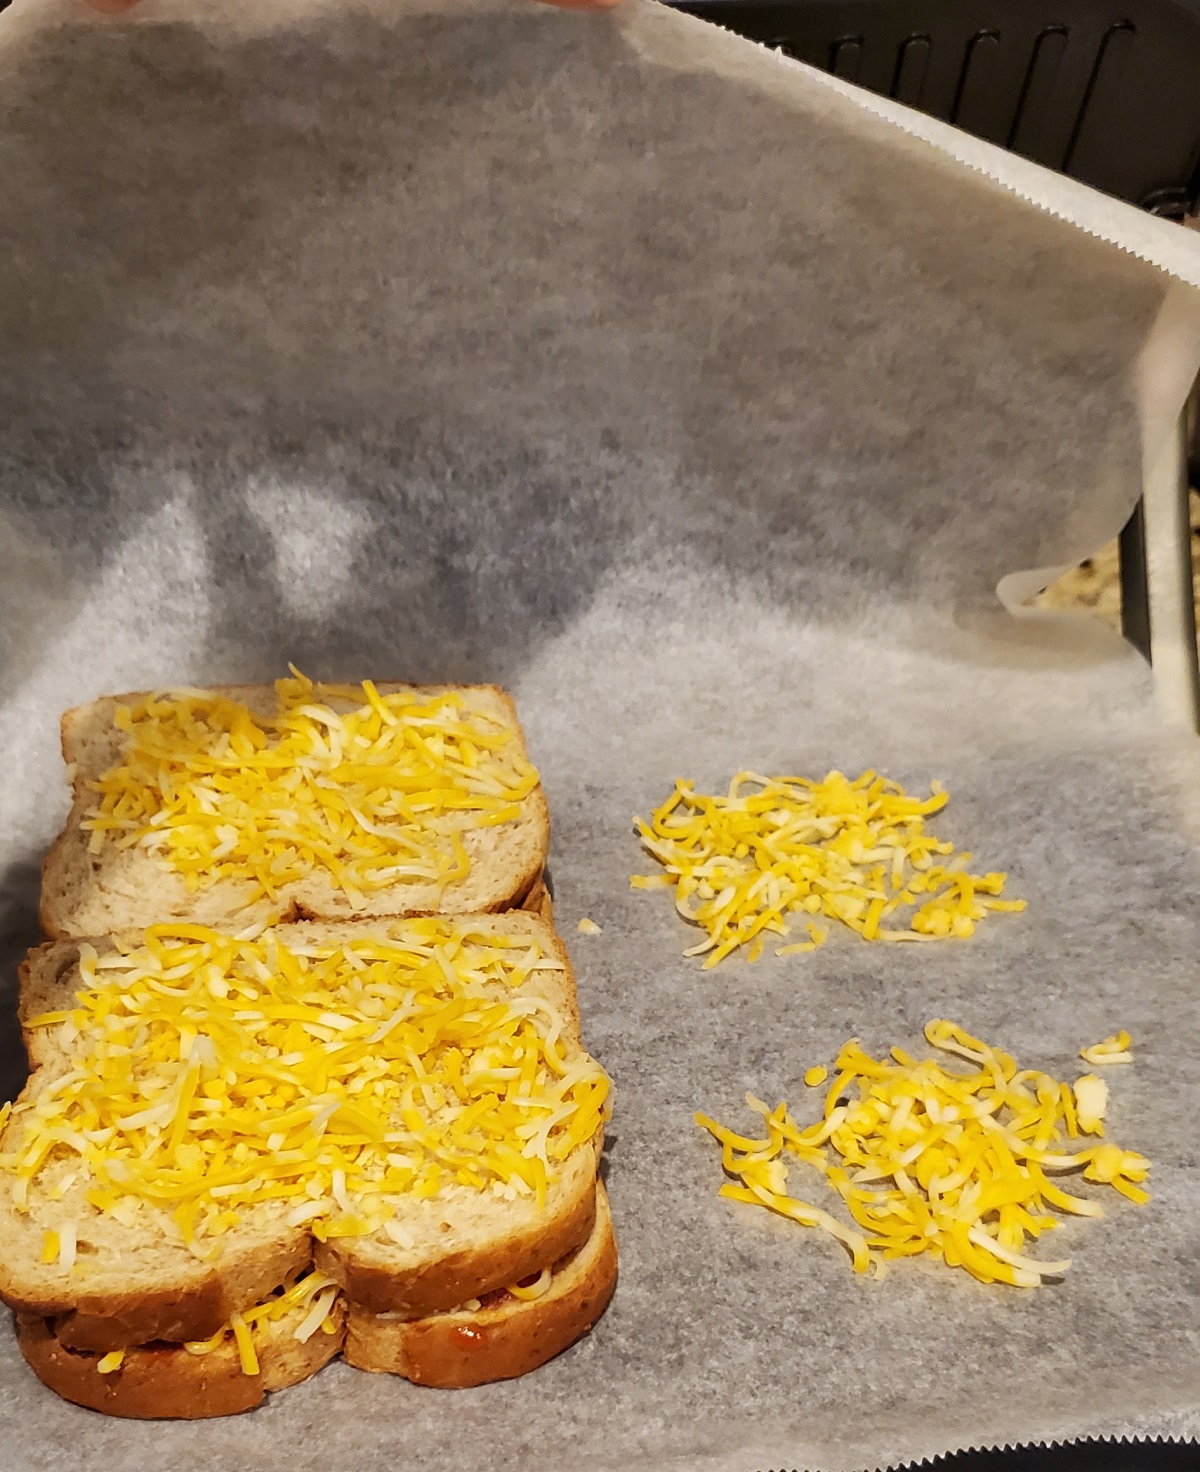 place parchment paper on grill and spread cheese